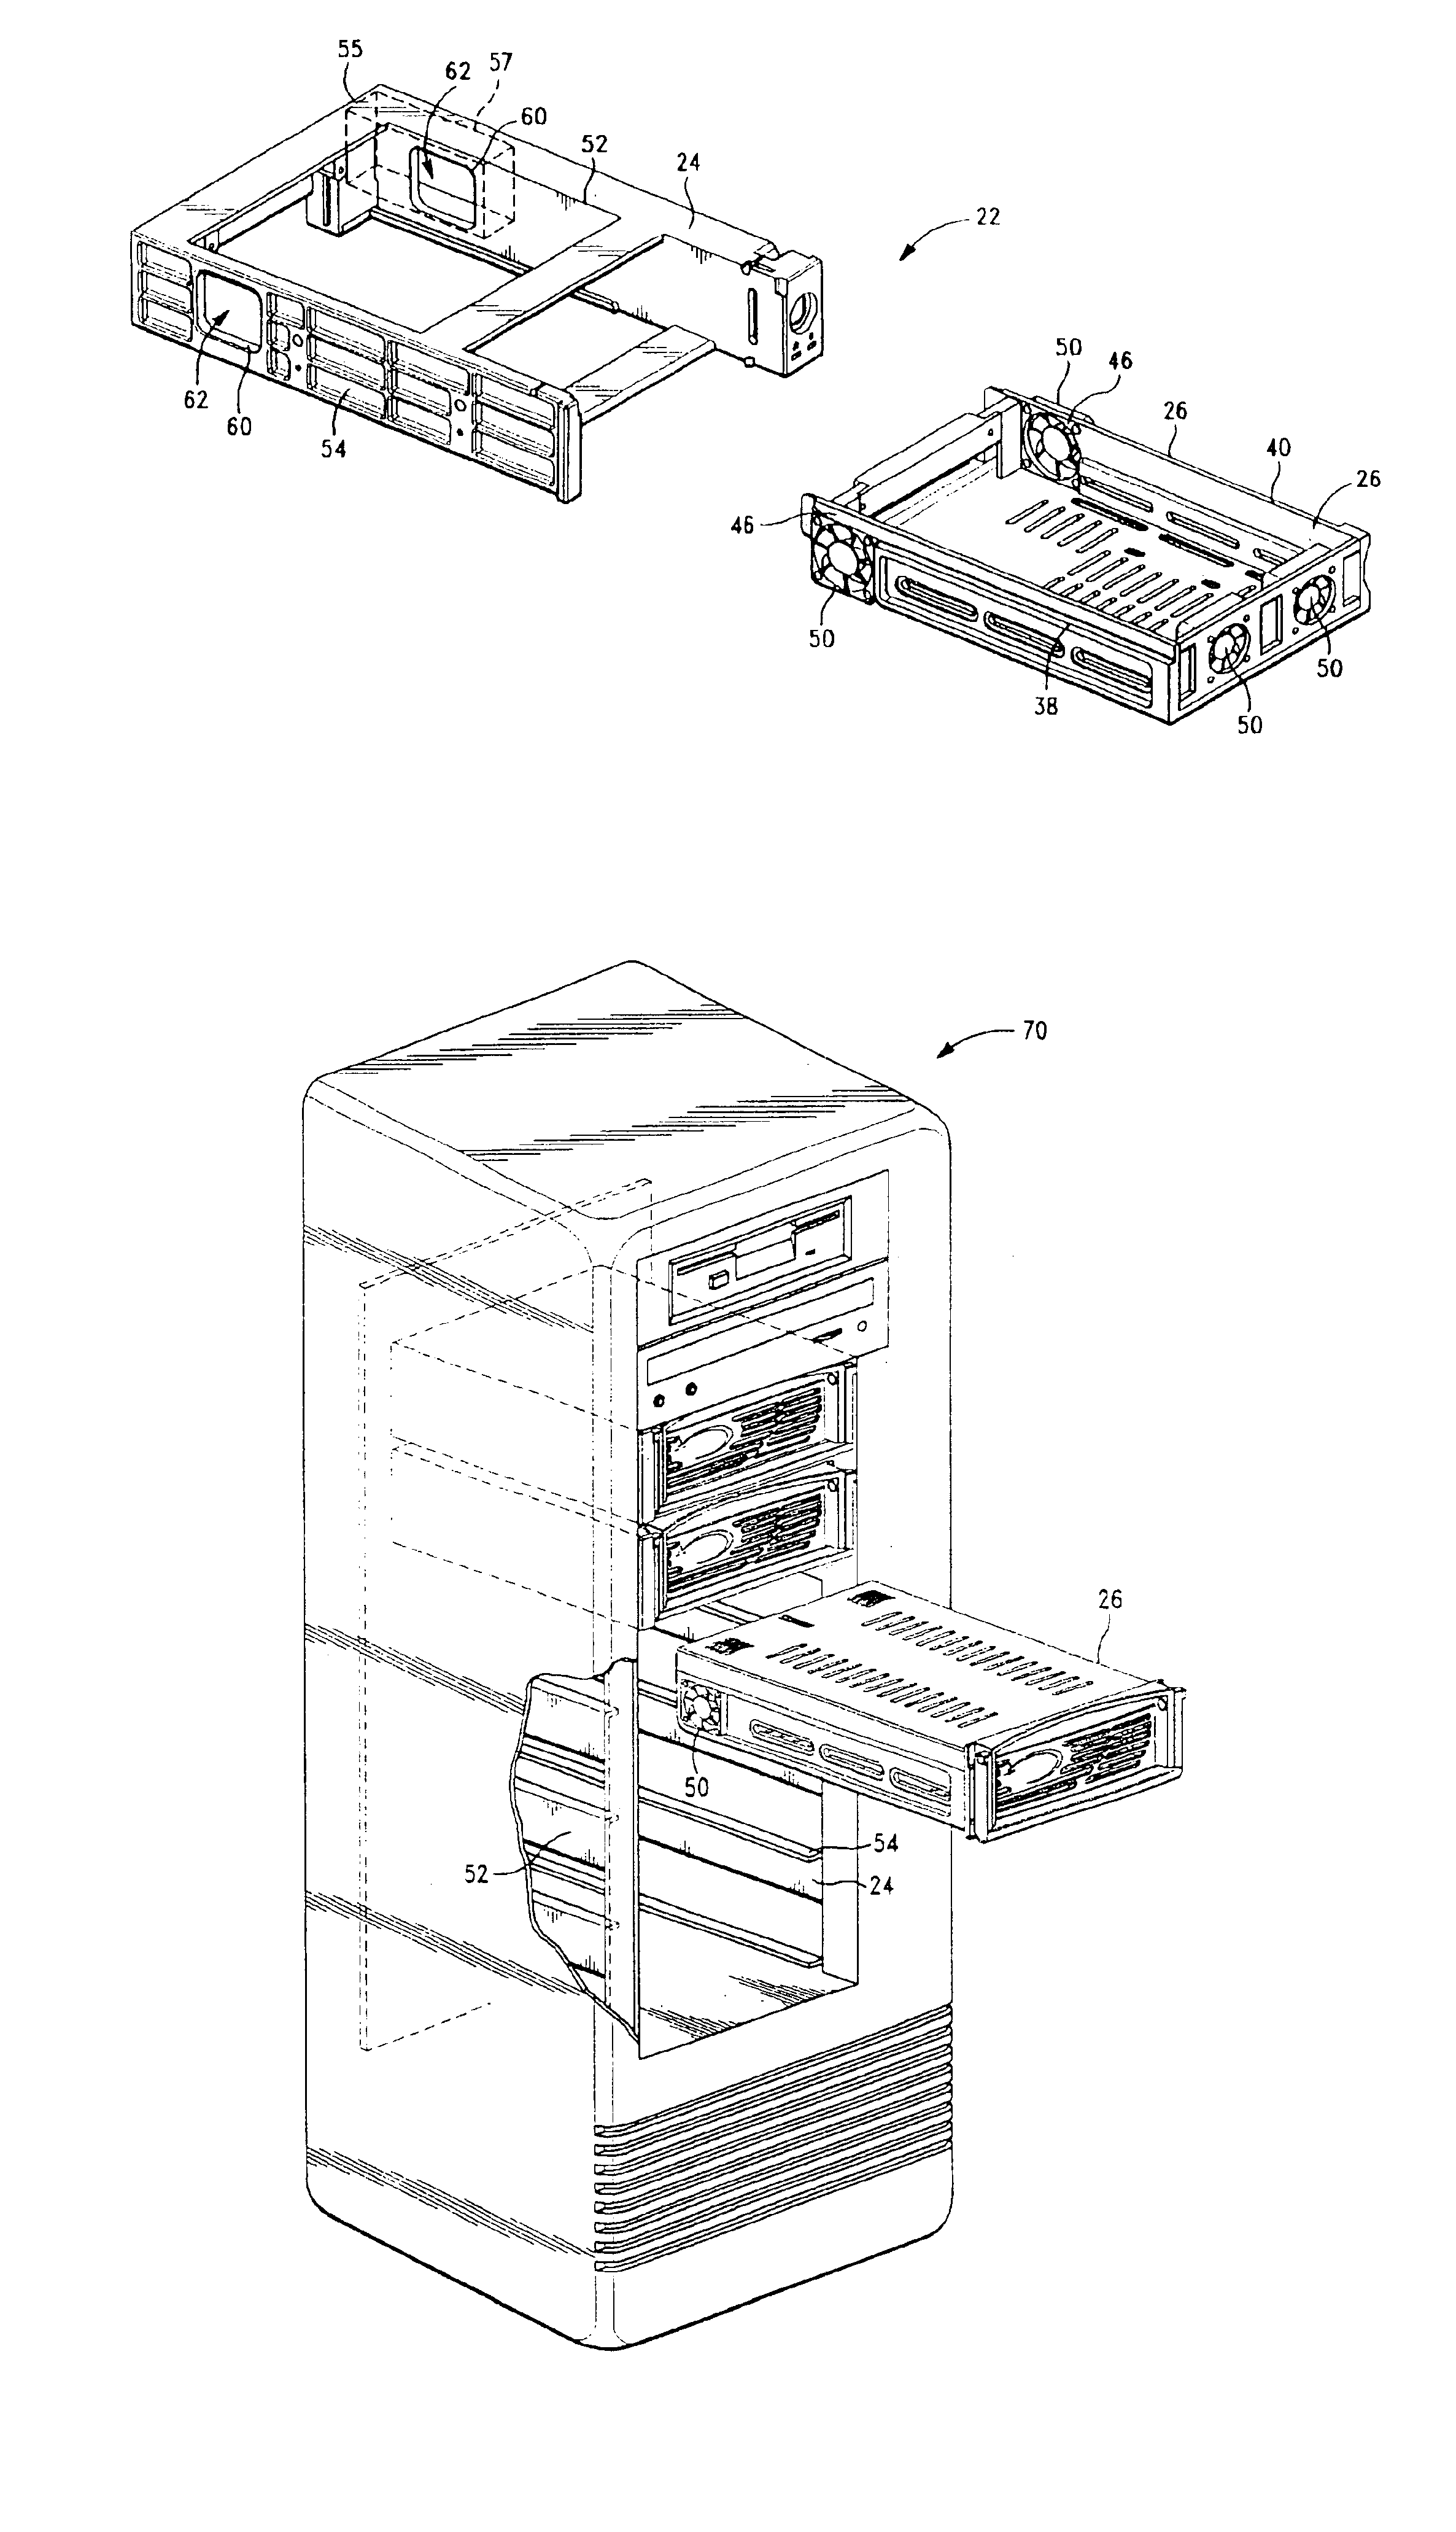 Memory storage device docking adapter having a laterally mounted fan